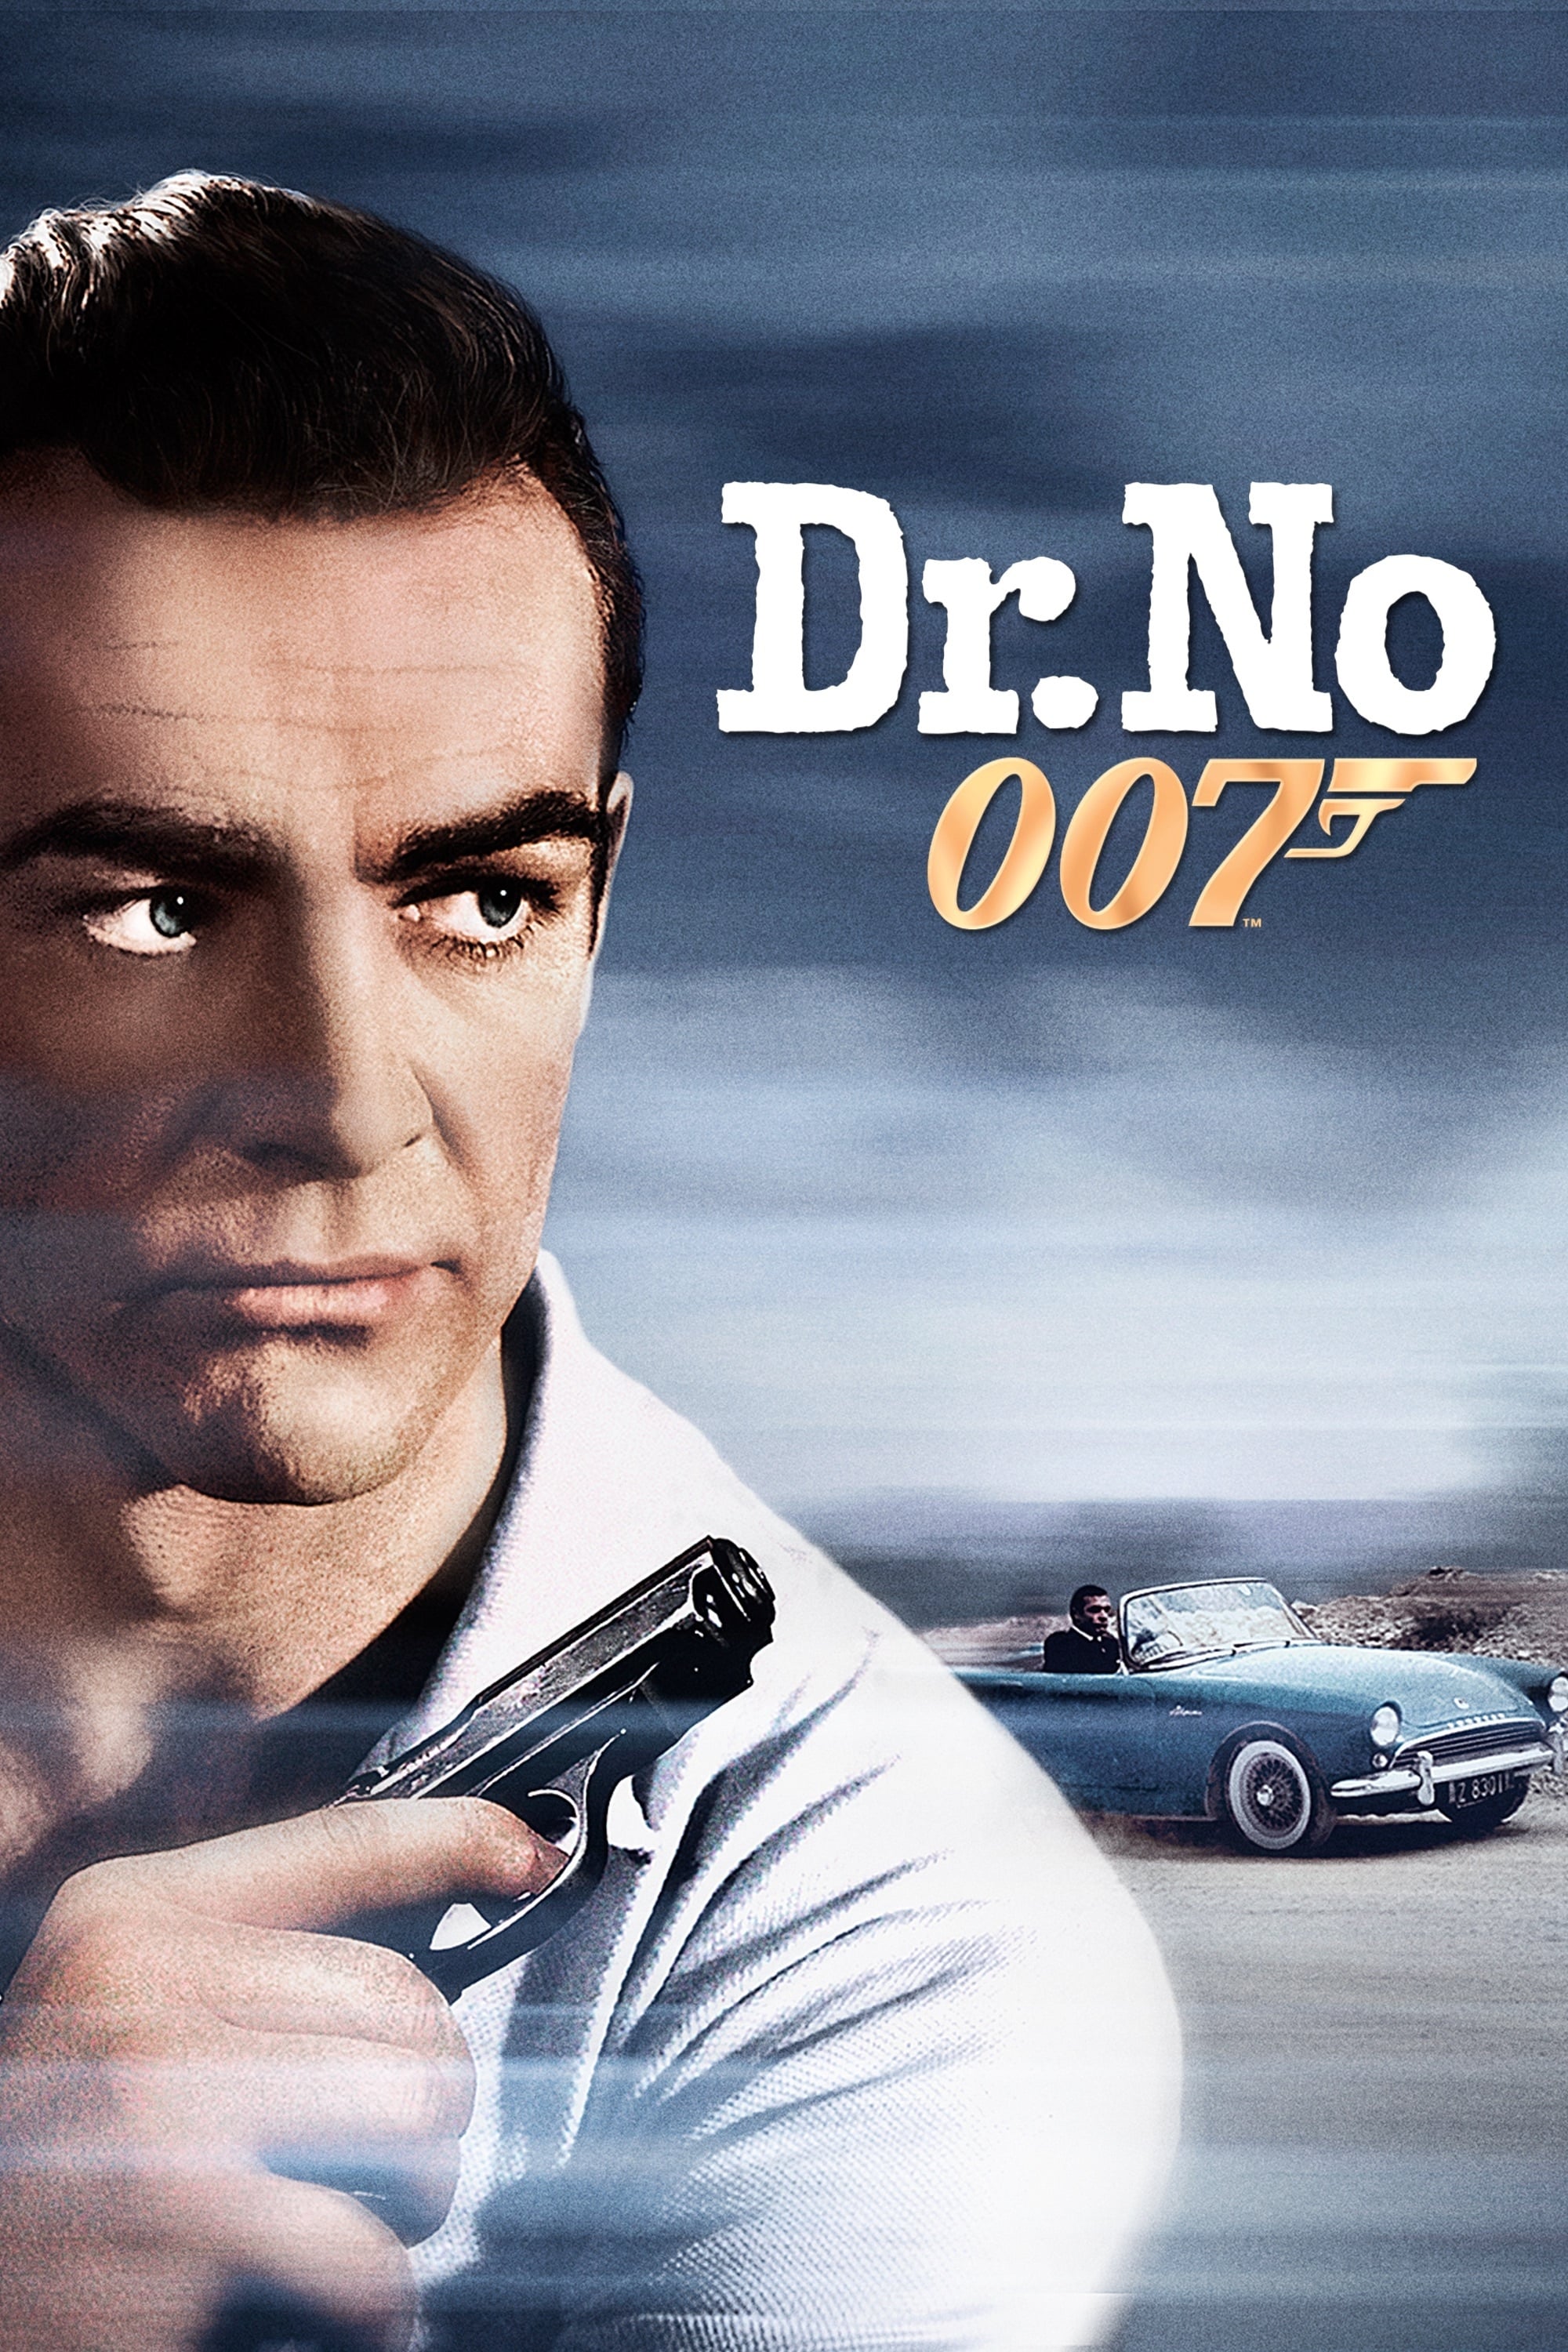 All James Bond movies to watch on Amazon or iTunes